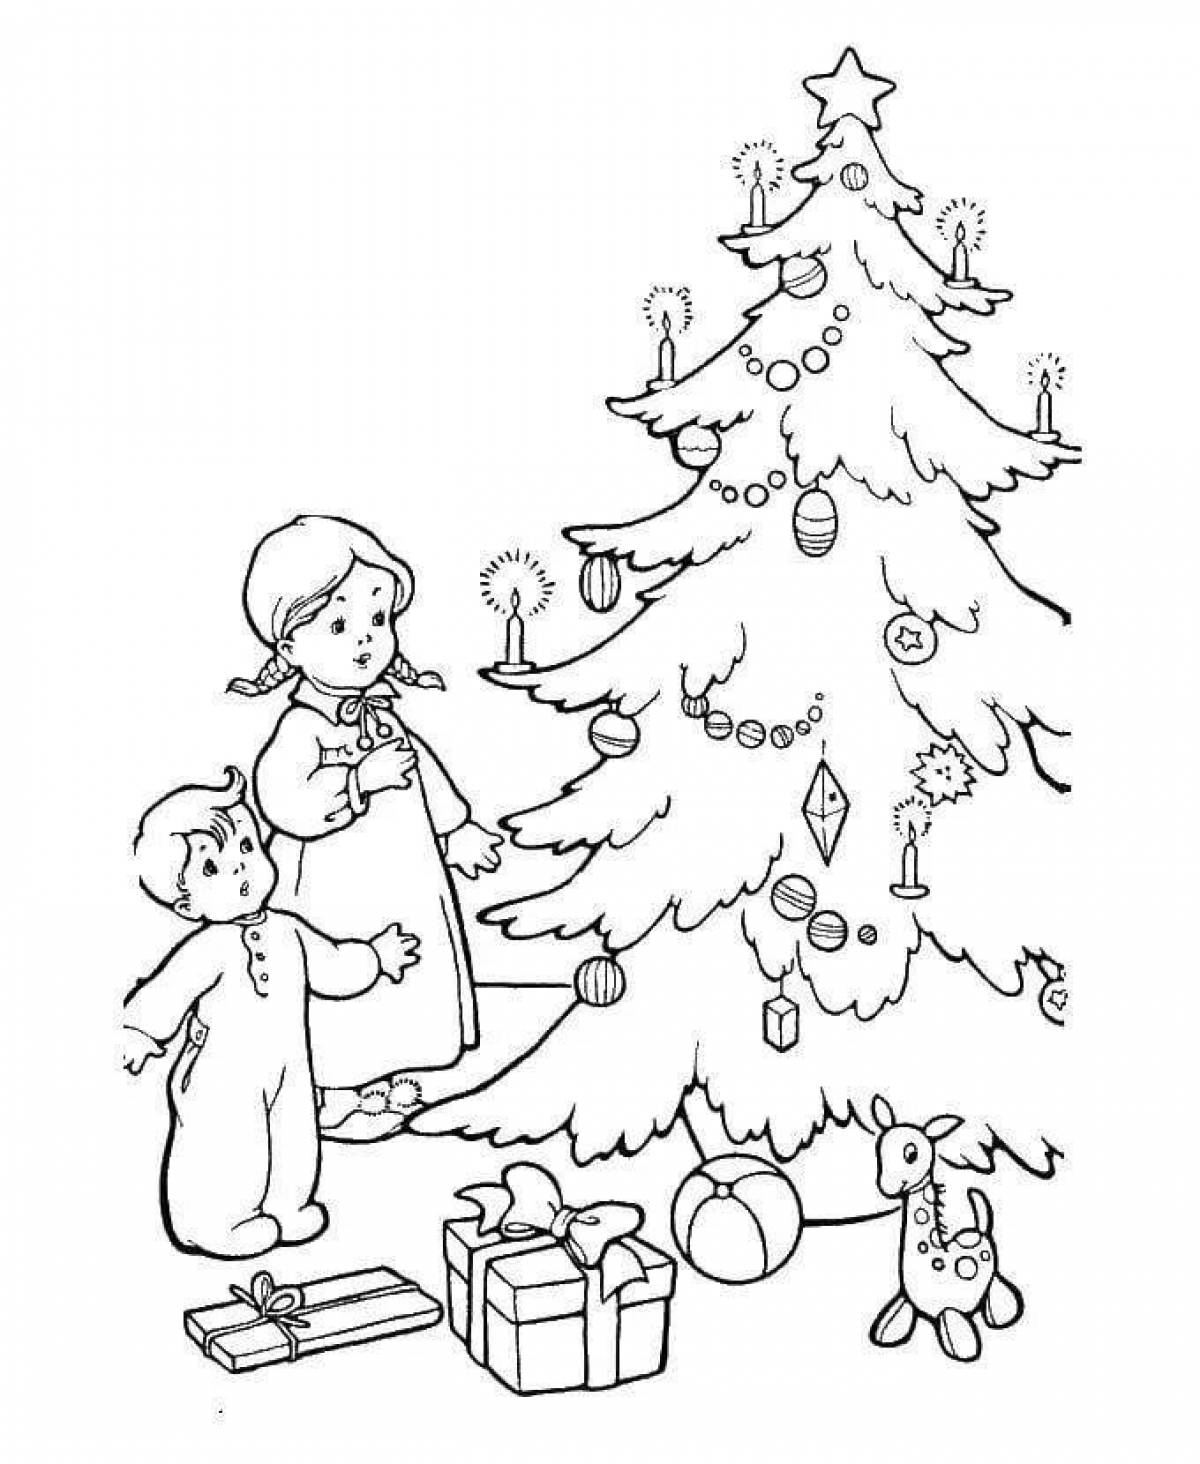 Bright Christmas coloring book